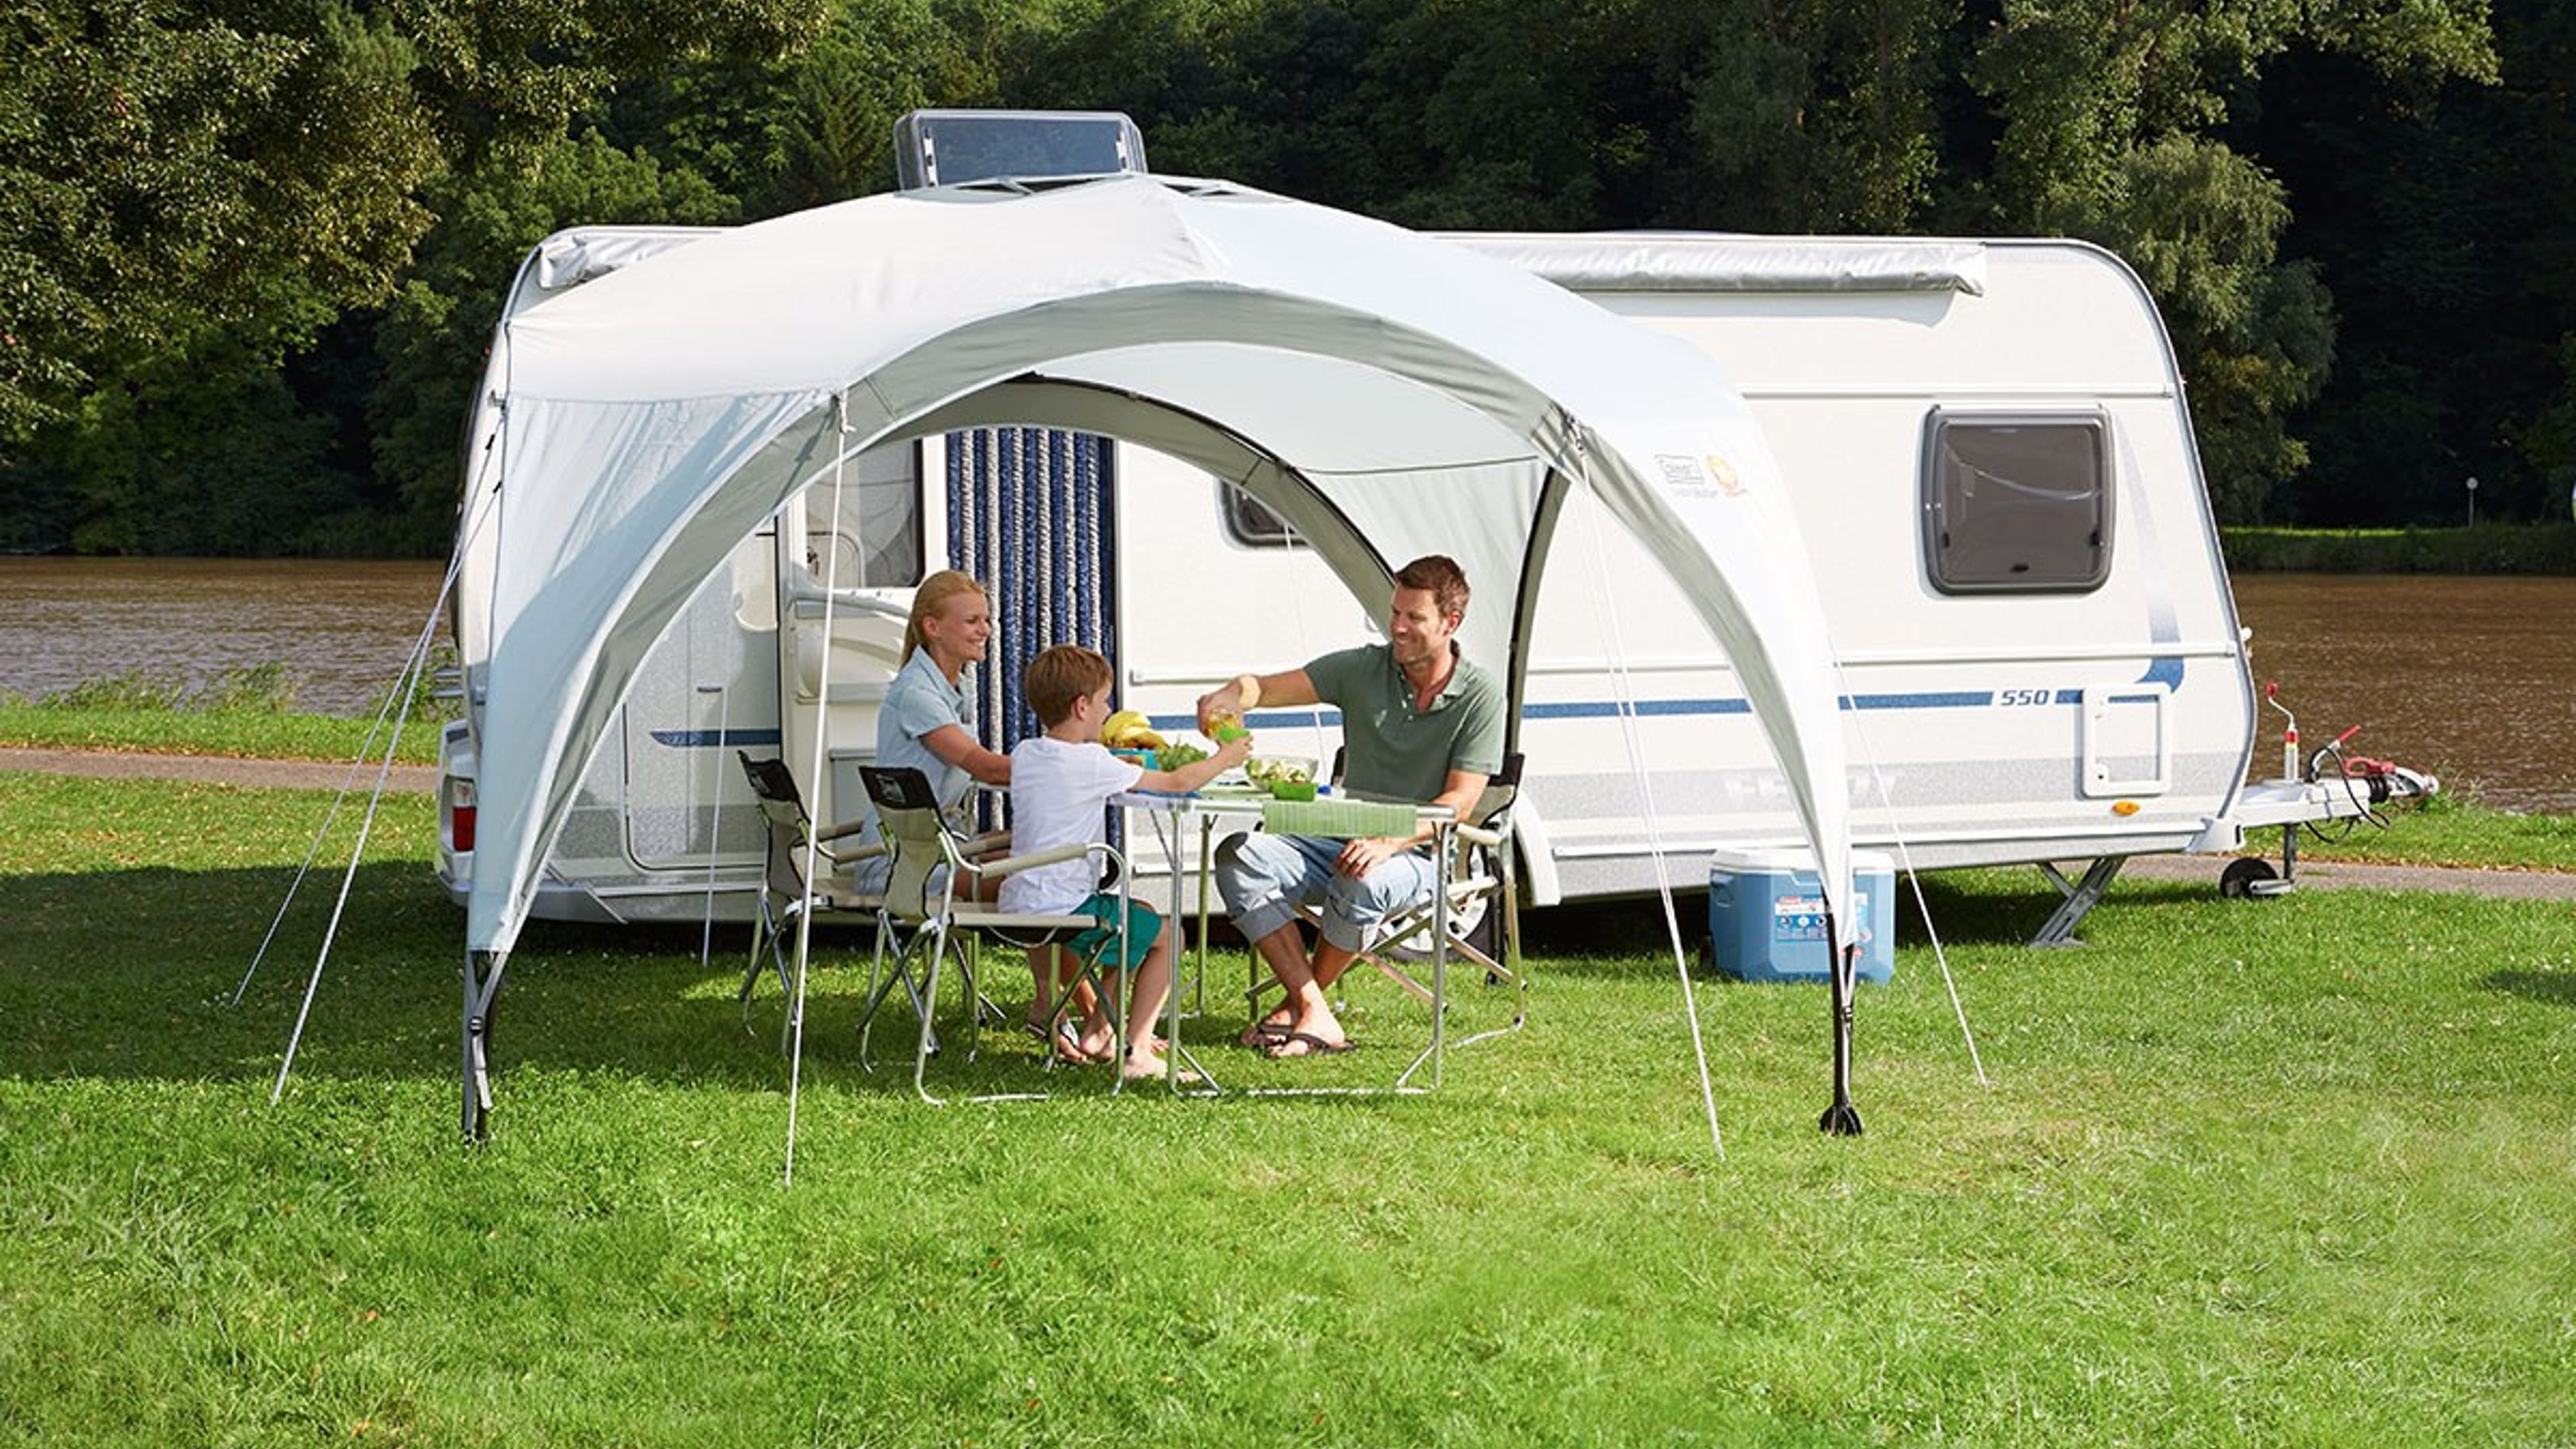 Caravanning with the Event Shelter